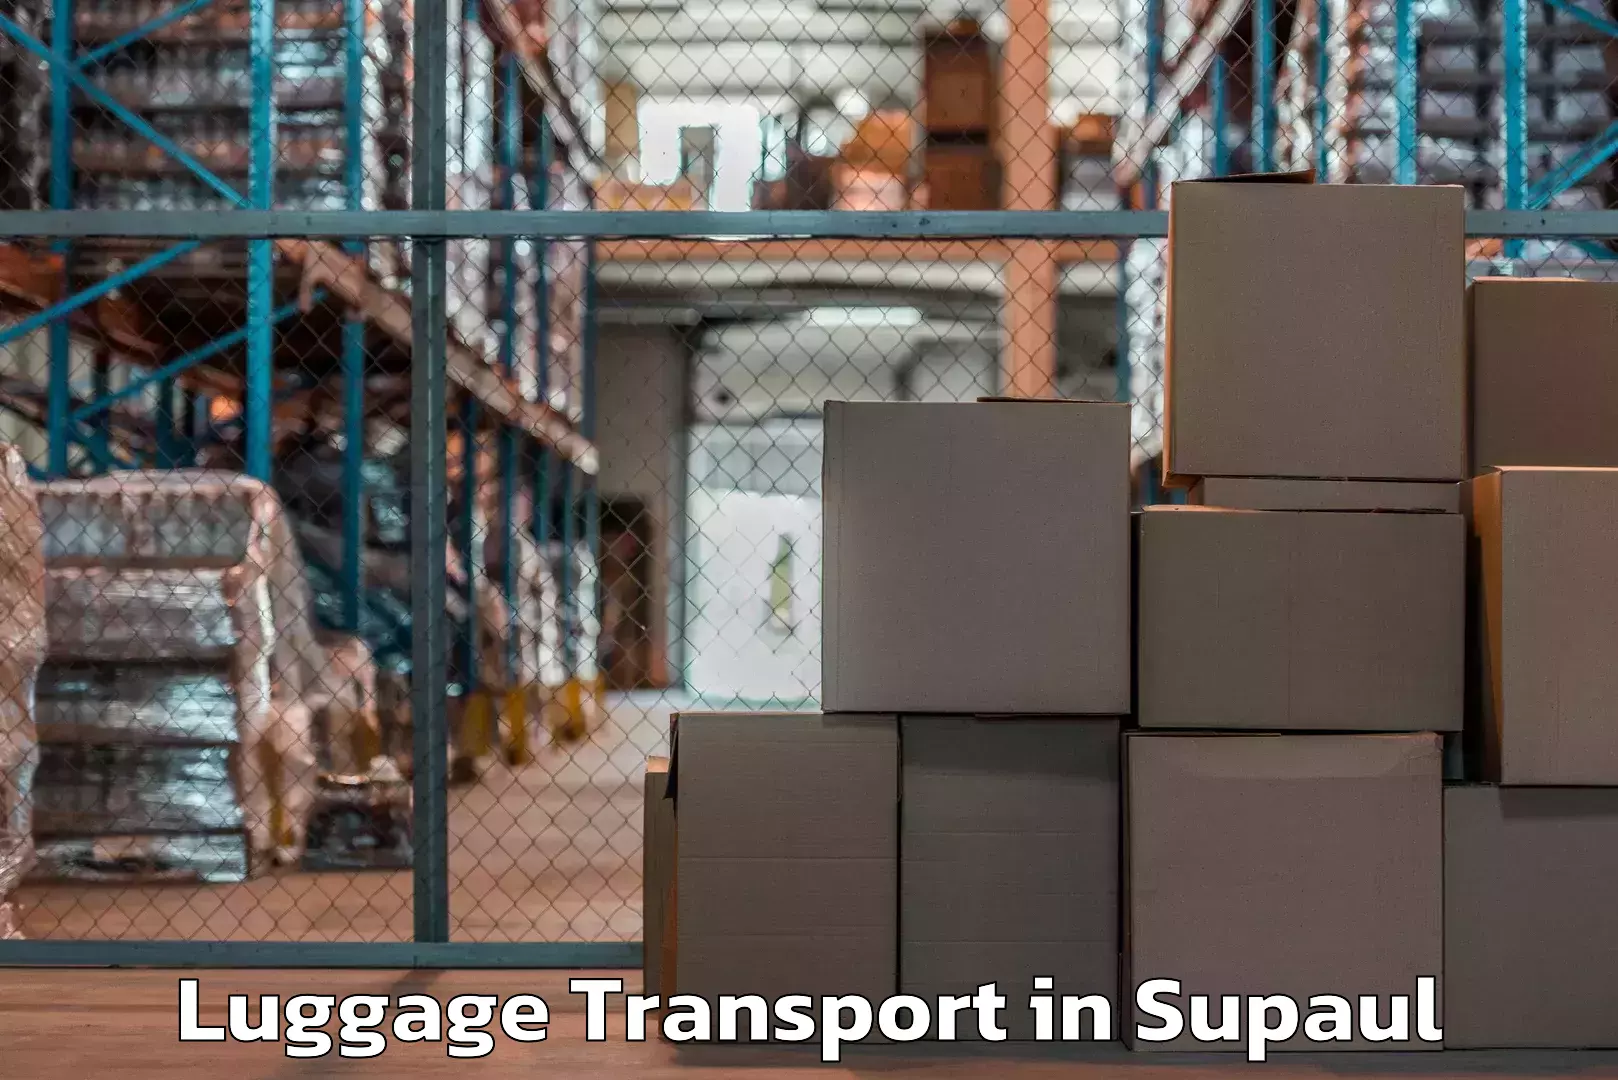 Baggage transport technology in Supaul